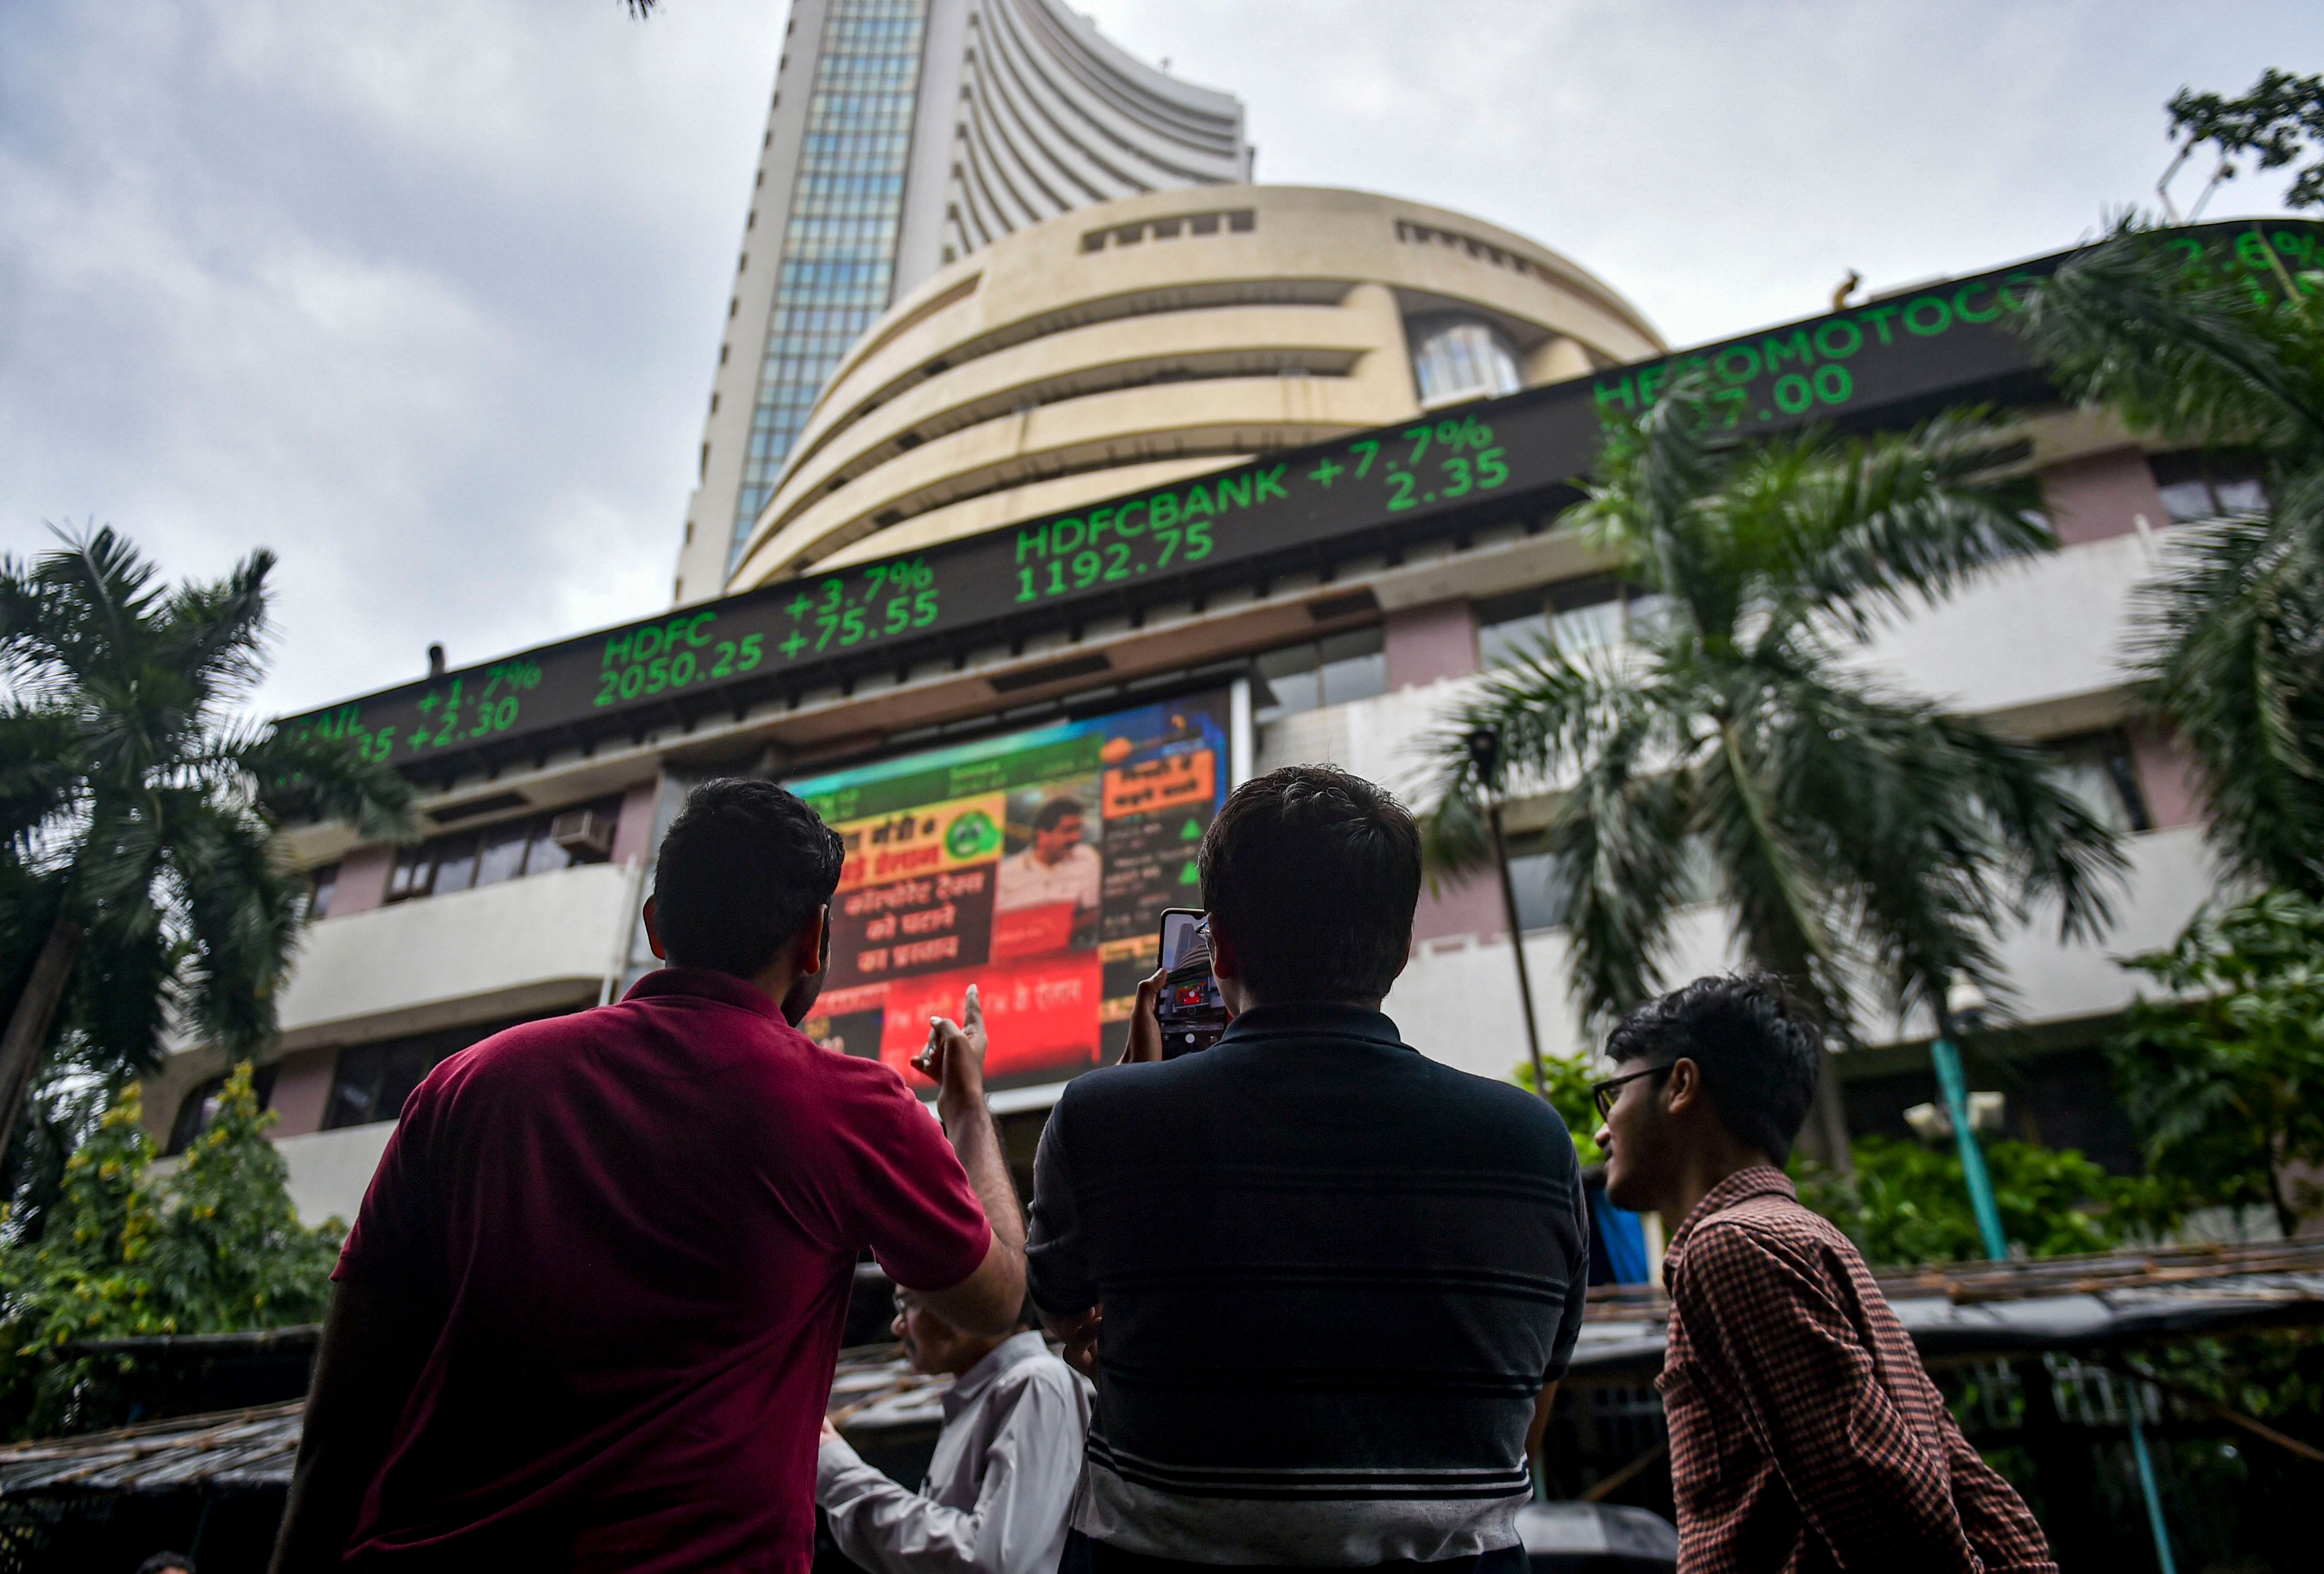 Bystanders react as they watch the stock prices displayed on a digital screen outside BSE building. (PTI Photo)